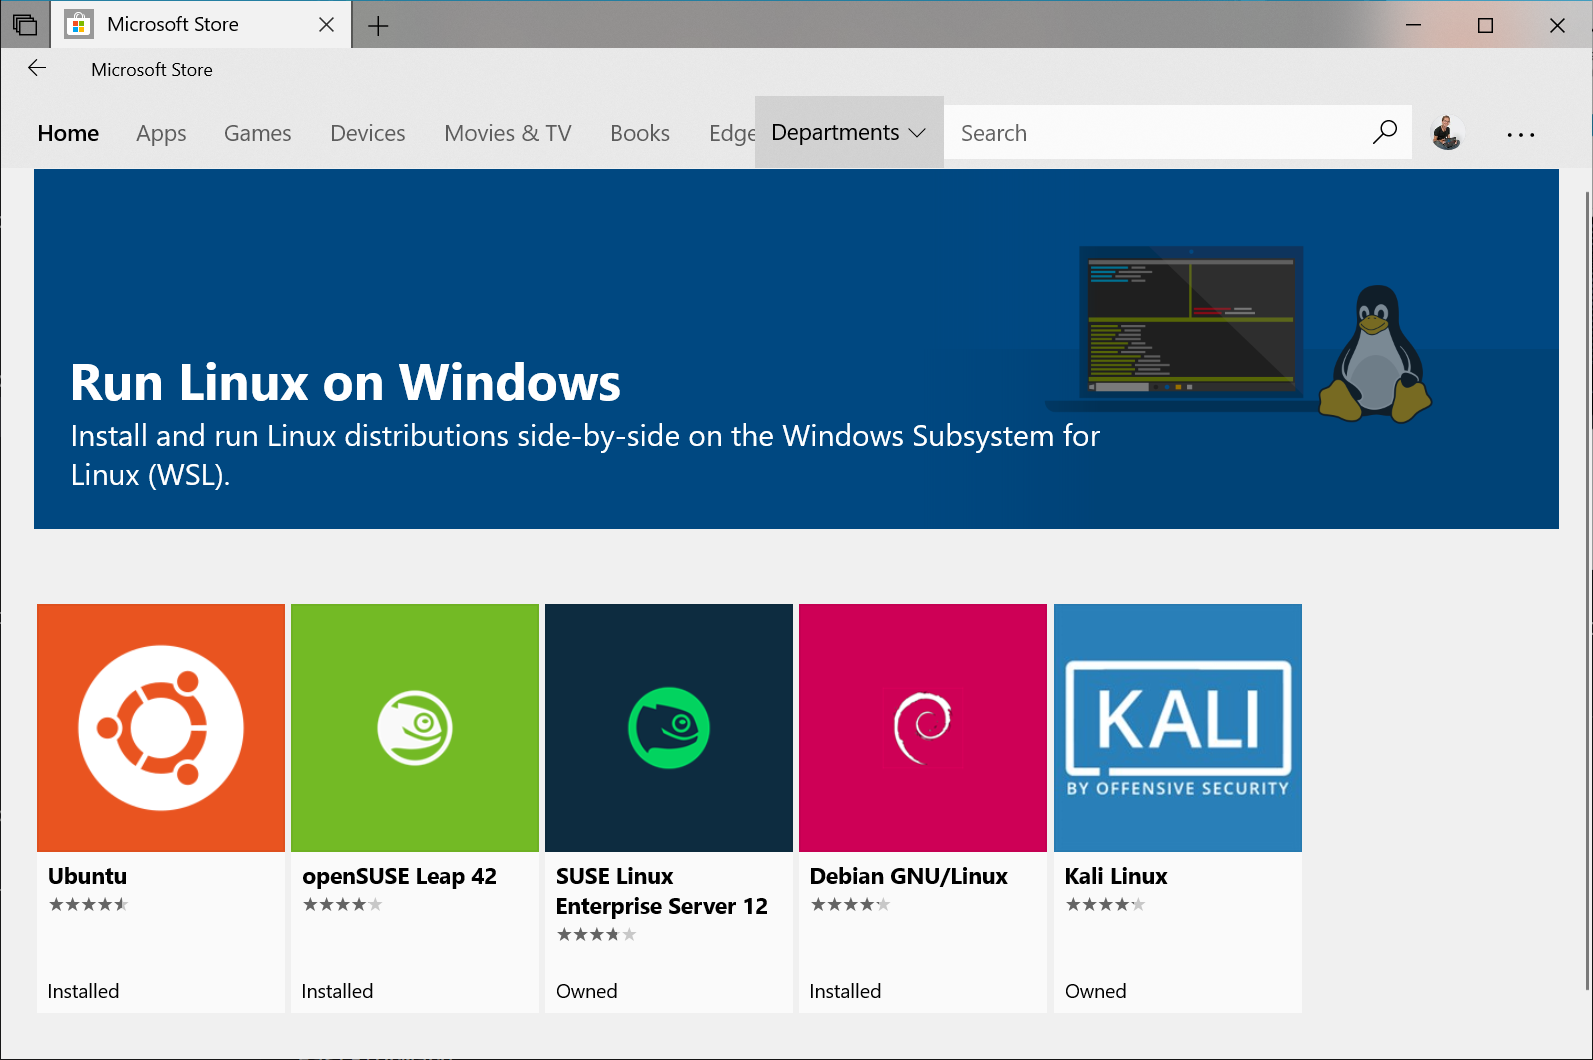 View of Linux distributions in the Microsoft Store